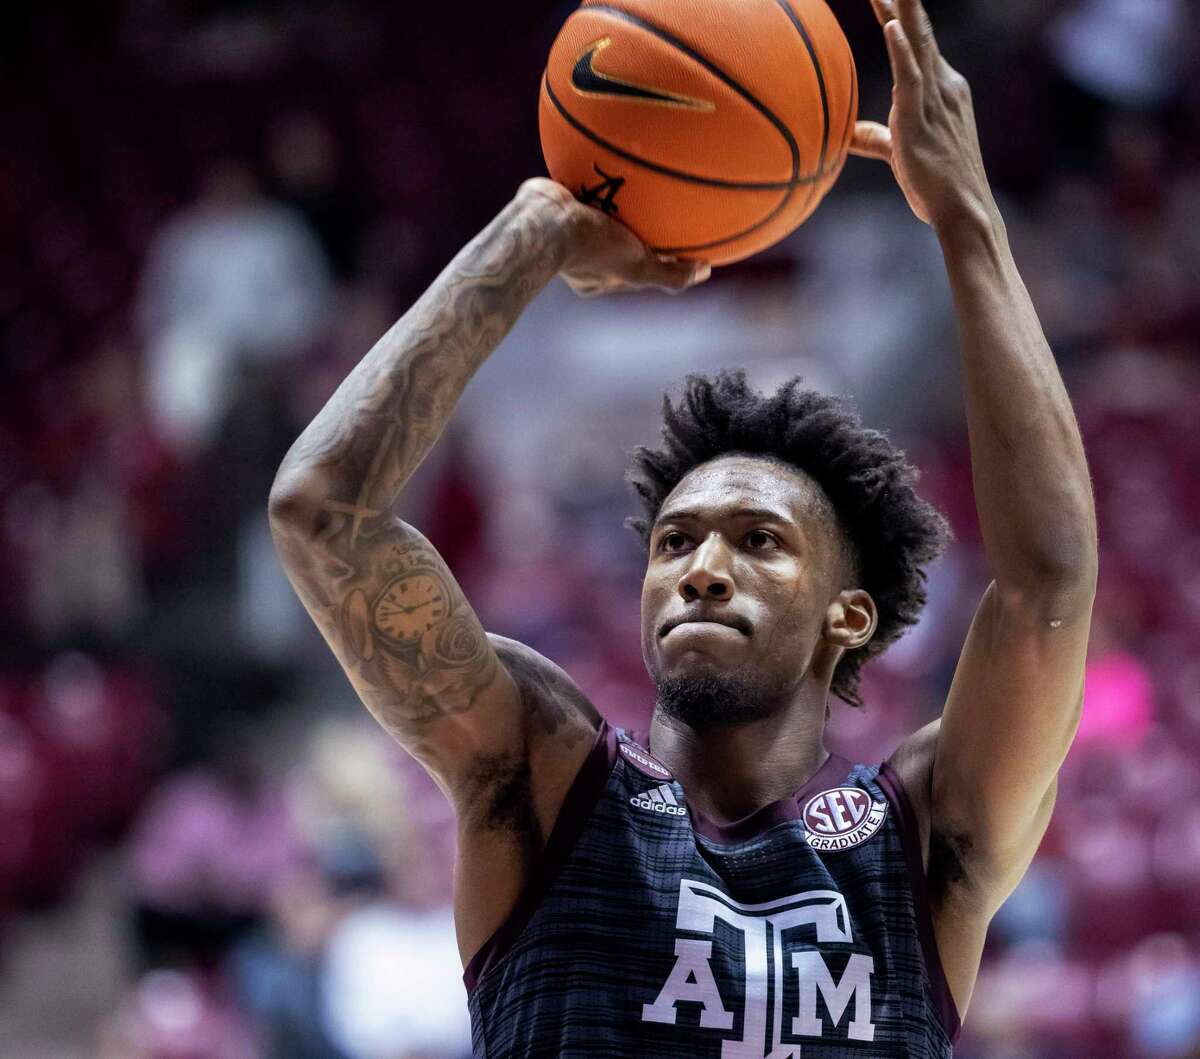 Texas A&M guard Quenton Jackson shoots a free throw against Alabama during the second half Wednesday, March 2, 2022, in Tuscaloosa, Ala.